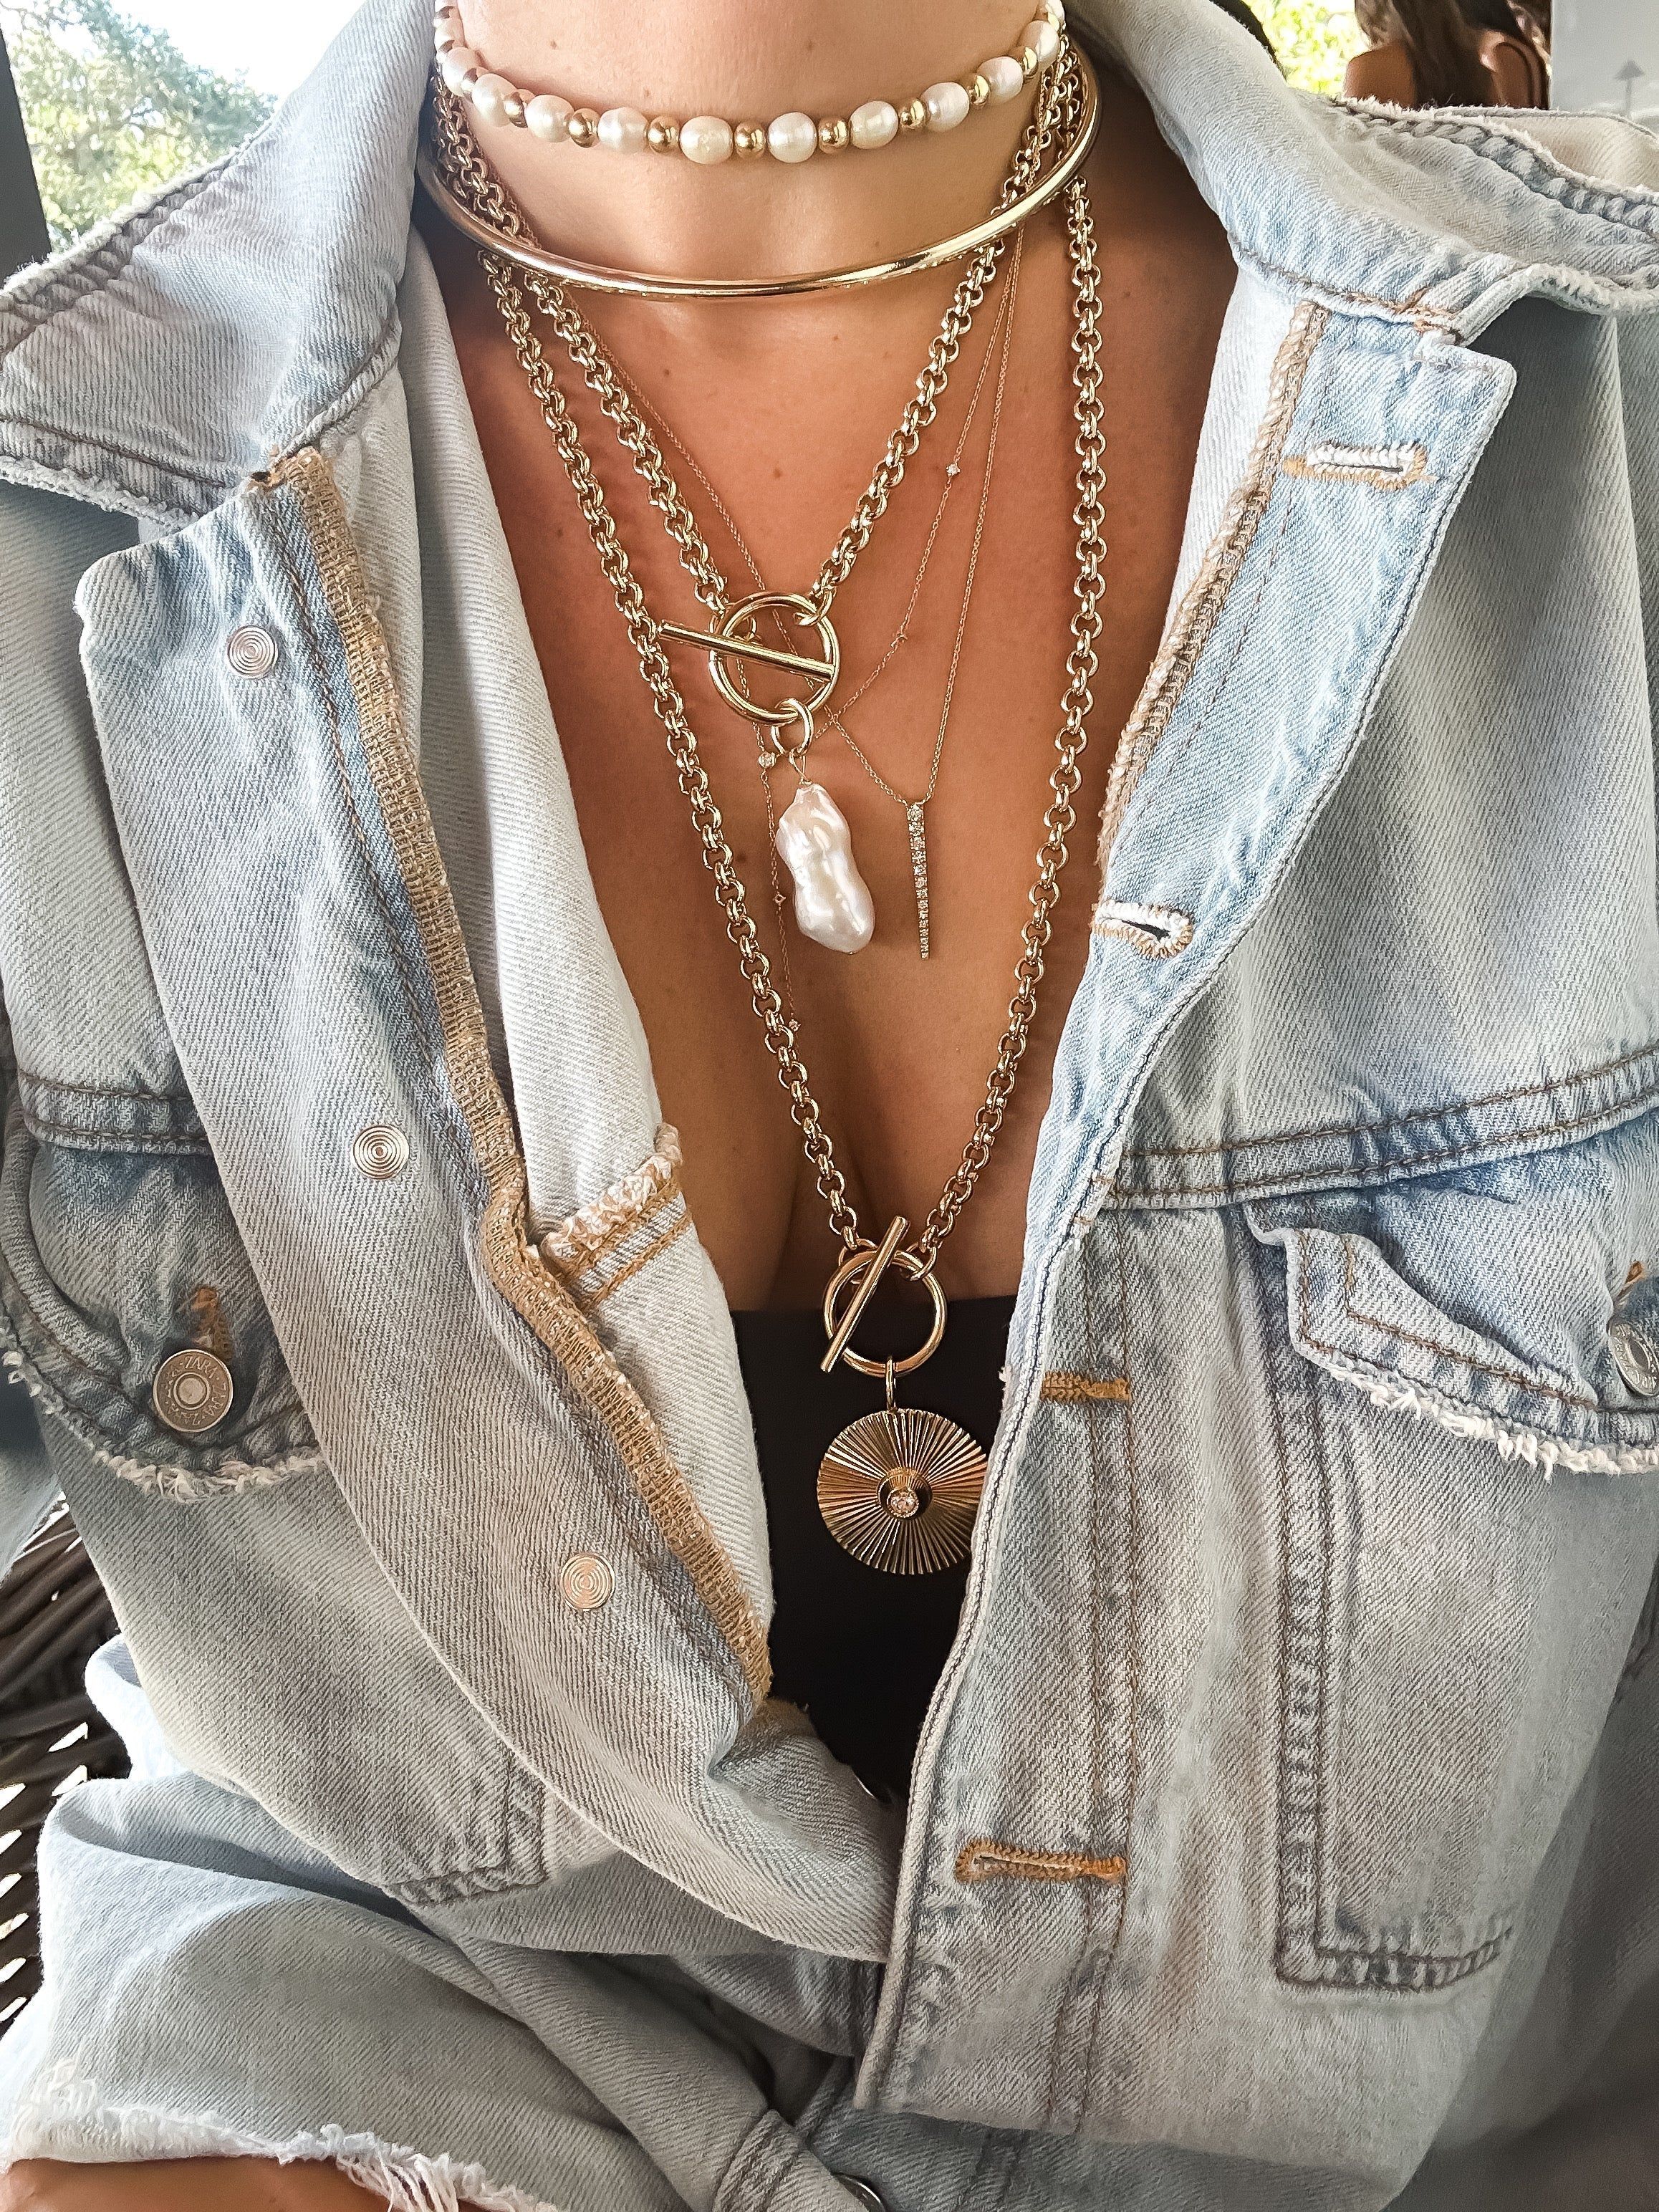 a woman wearing a denim jacket and a necklace